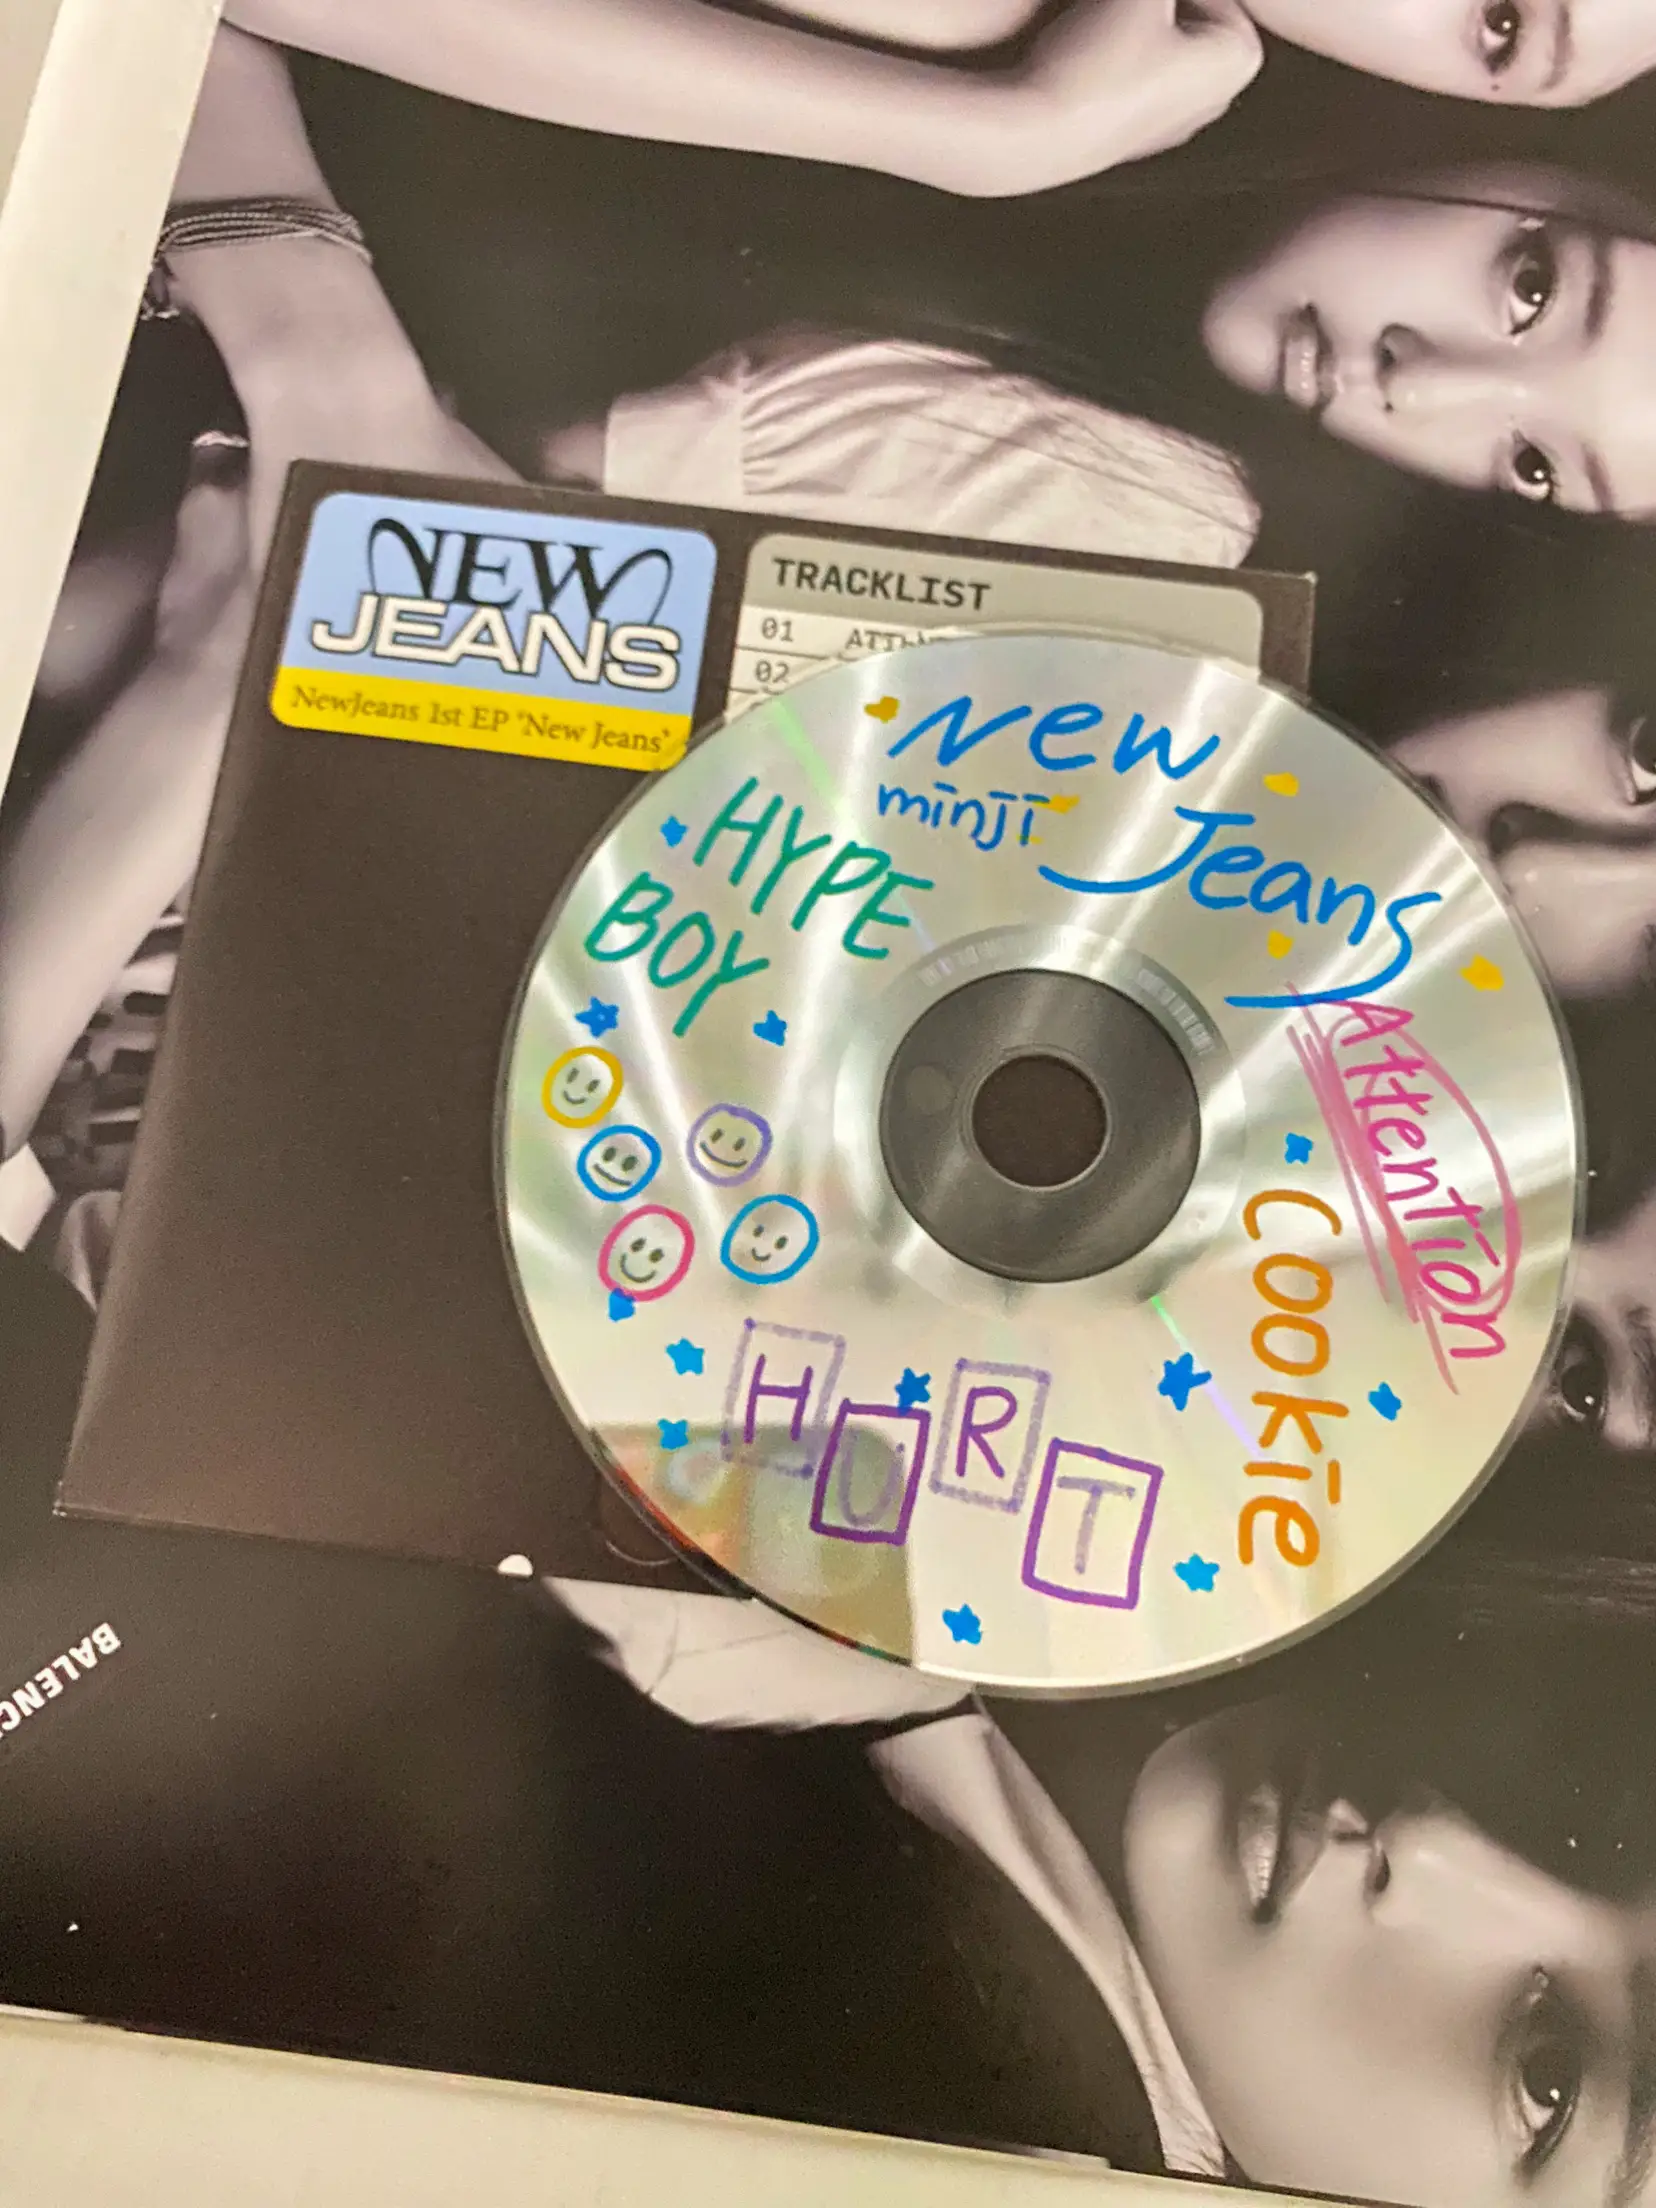 NewJeans - New Jeans 1st EP (Bluebook ver.)